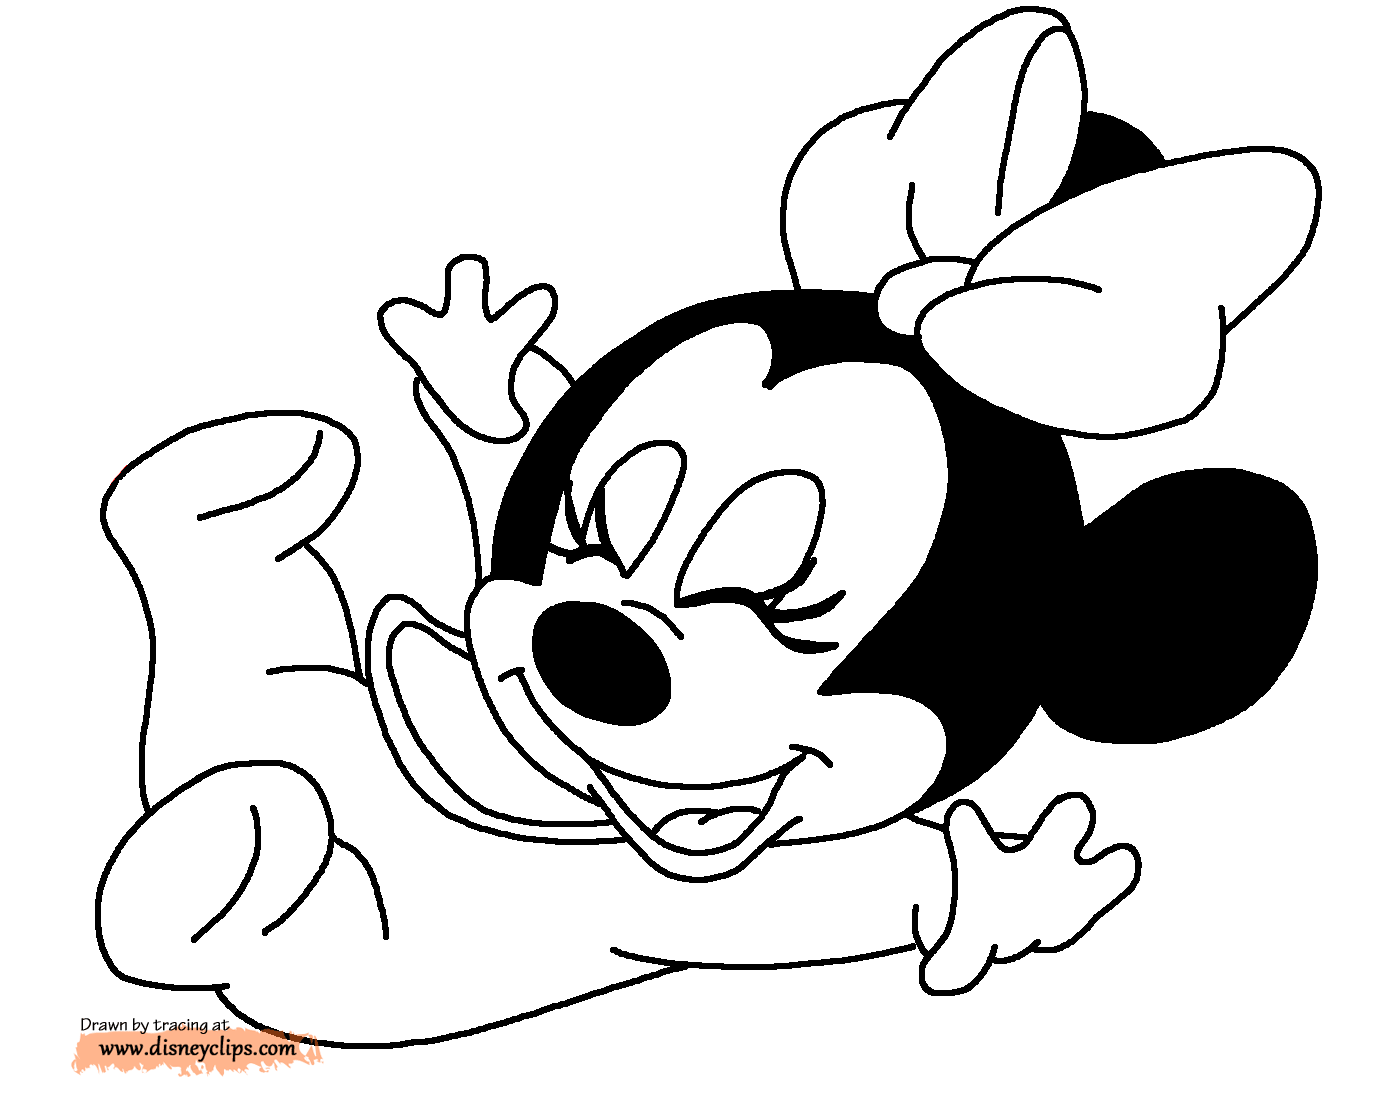 Disney Babies Coloring Pages Disney Coloring Book Coloring Wallpapers Download Free Images Wallpaper [coloring876.blogspot.com]